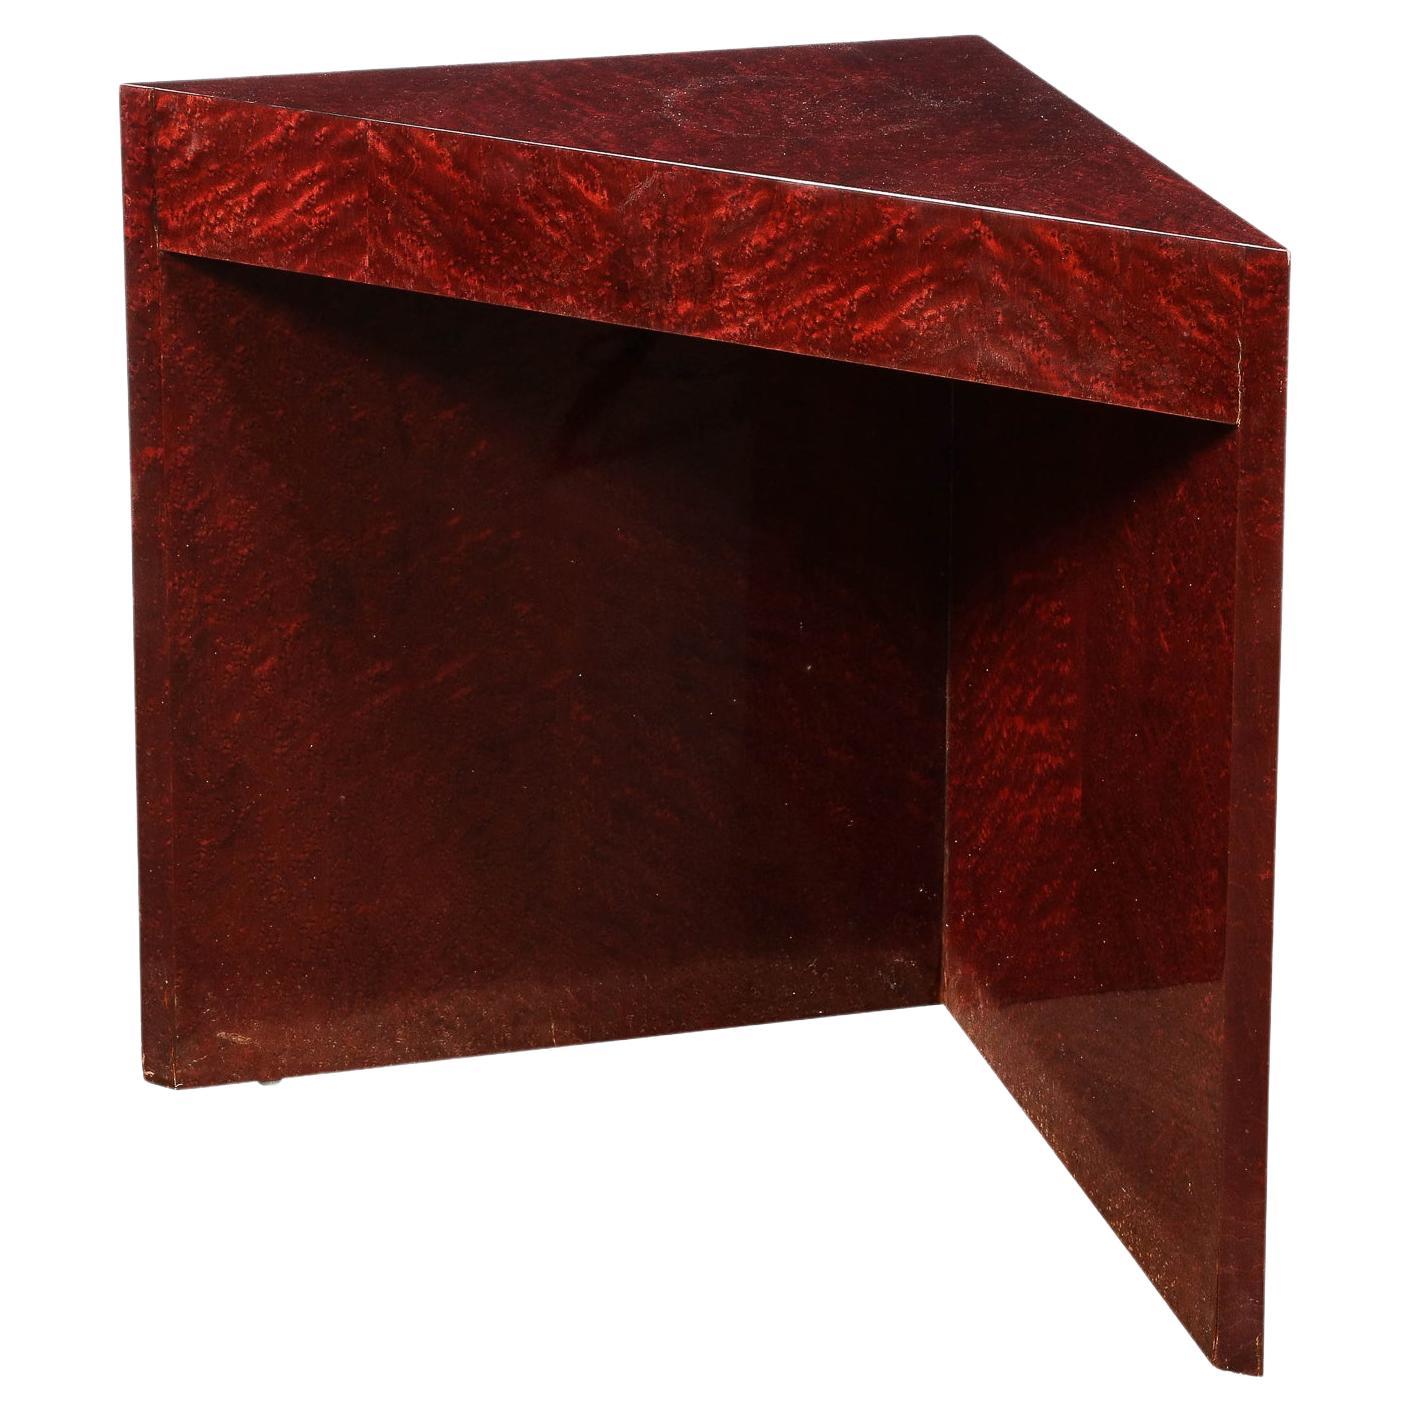 Modernist Geometric Triangular Side/ Accent Table in Burled Walnut by Pace